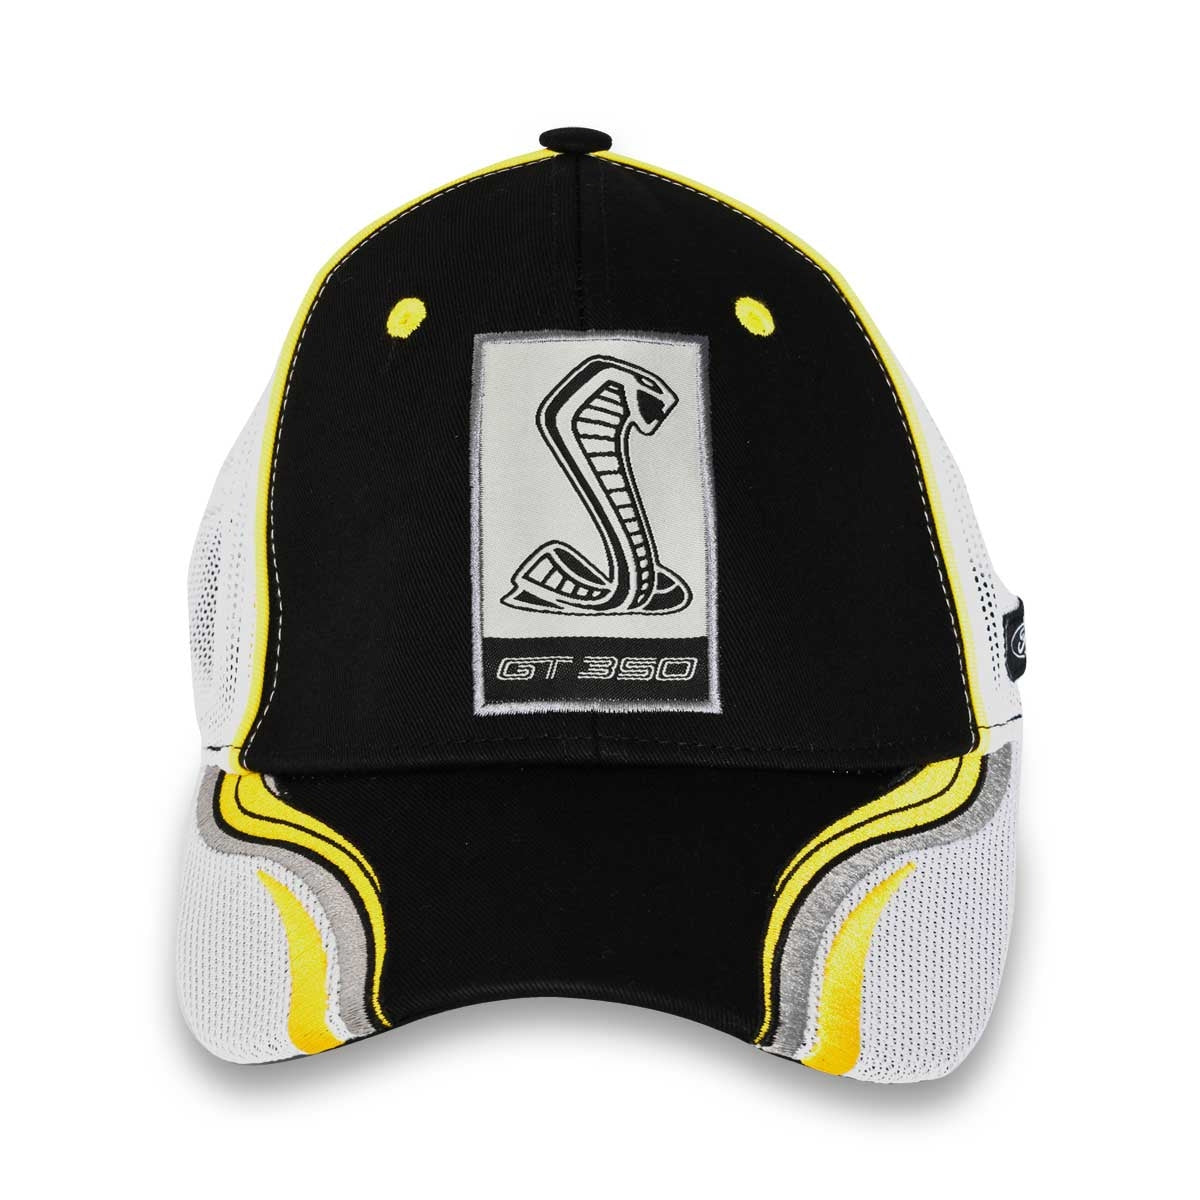 Ford Mustang Shelby GT350 Embroidered Black & Yellow Adjustable Baseball Hat Cap